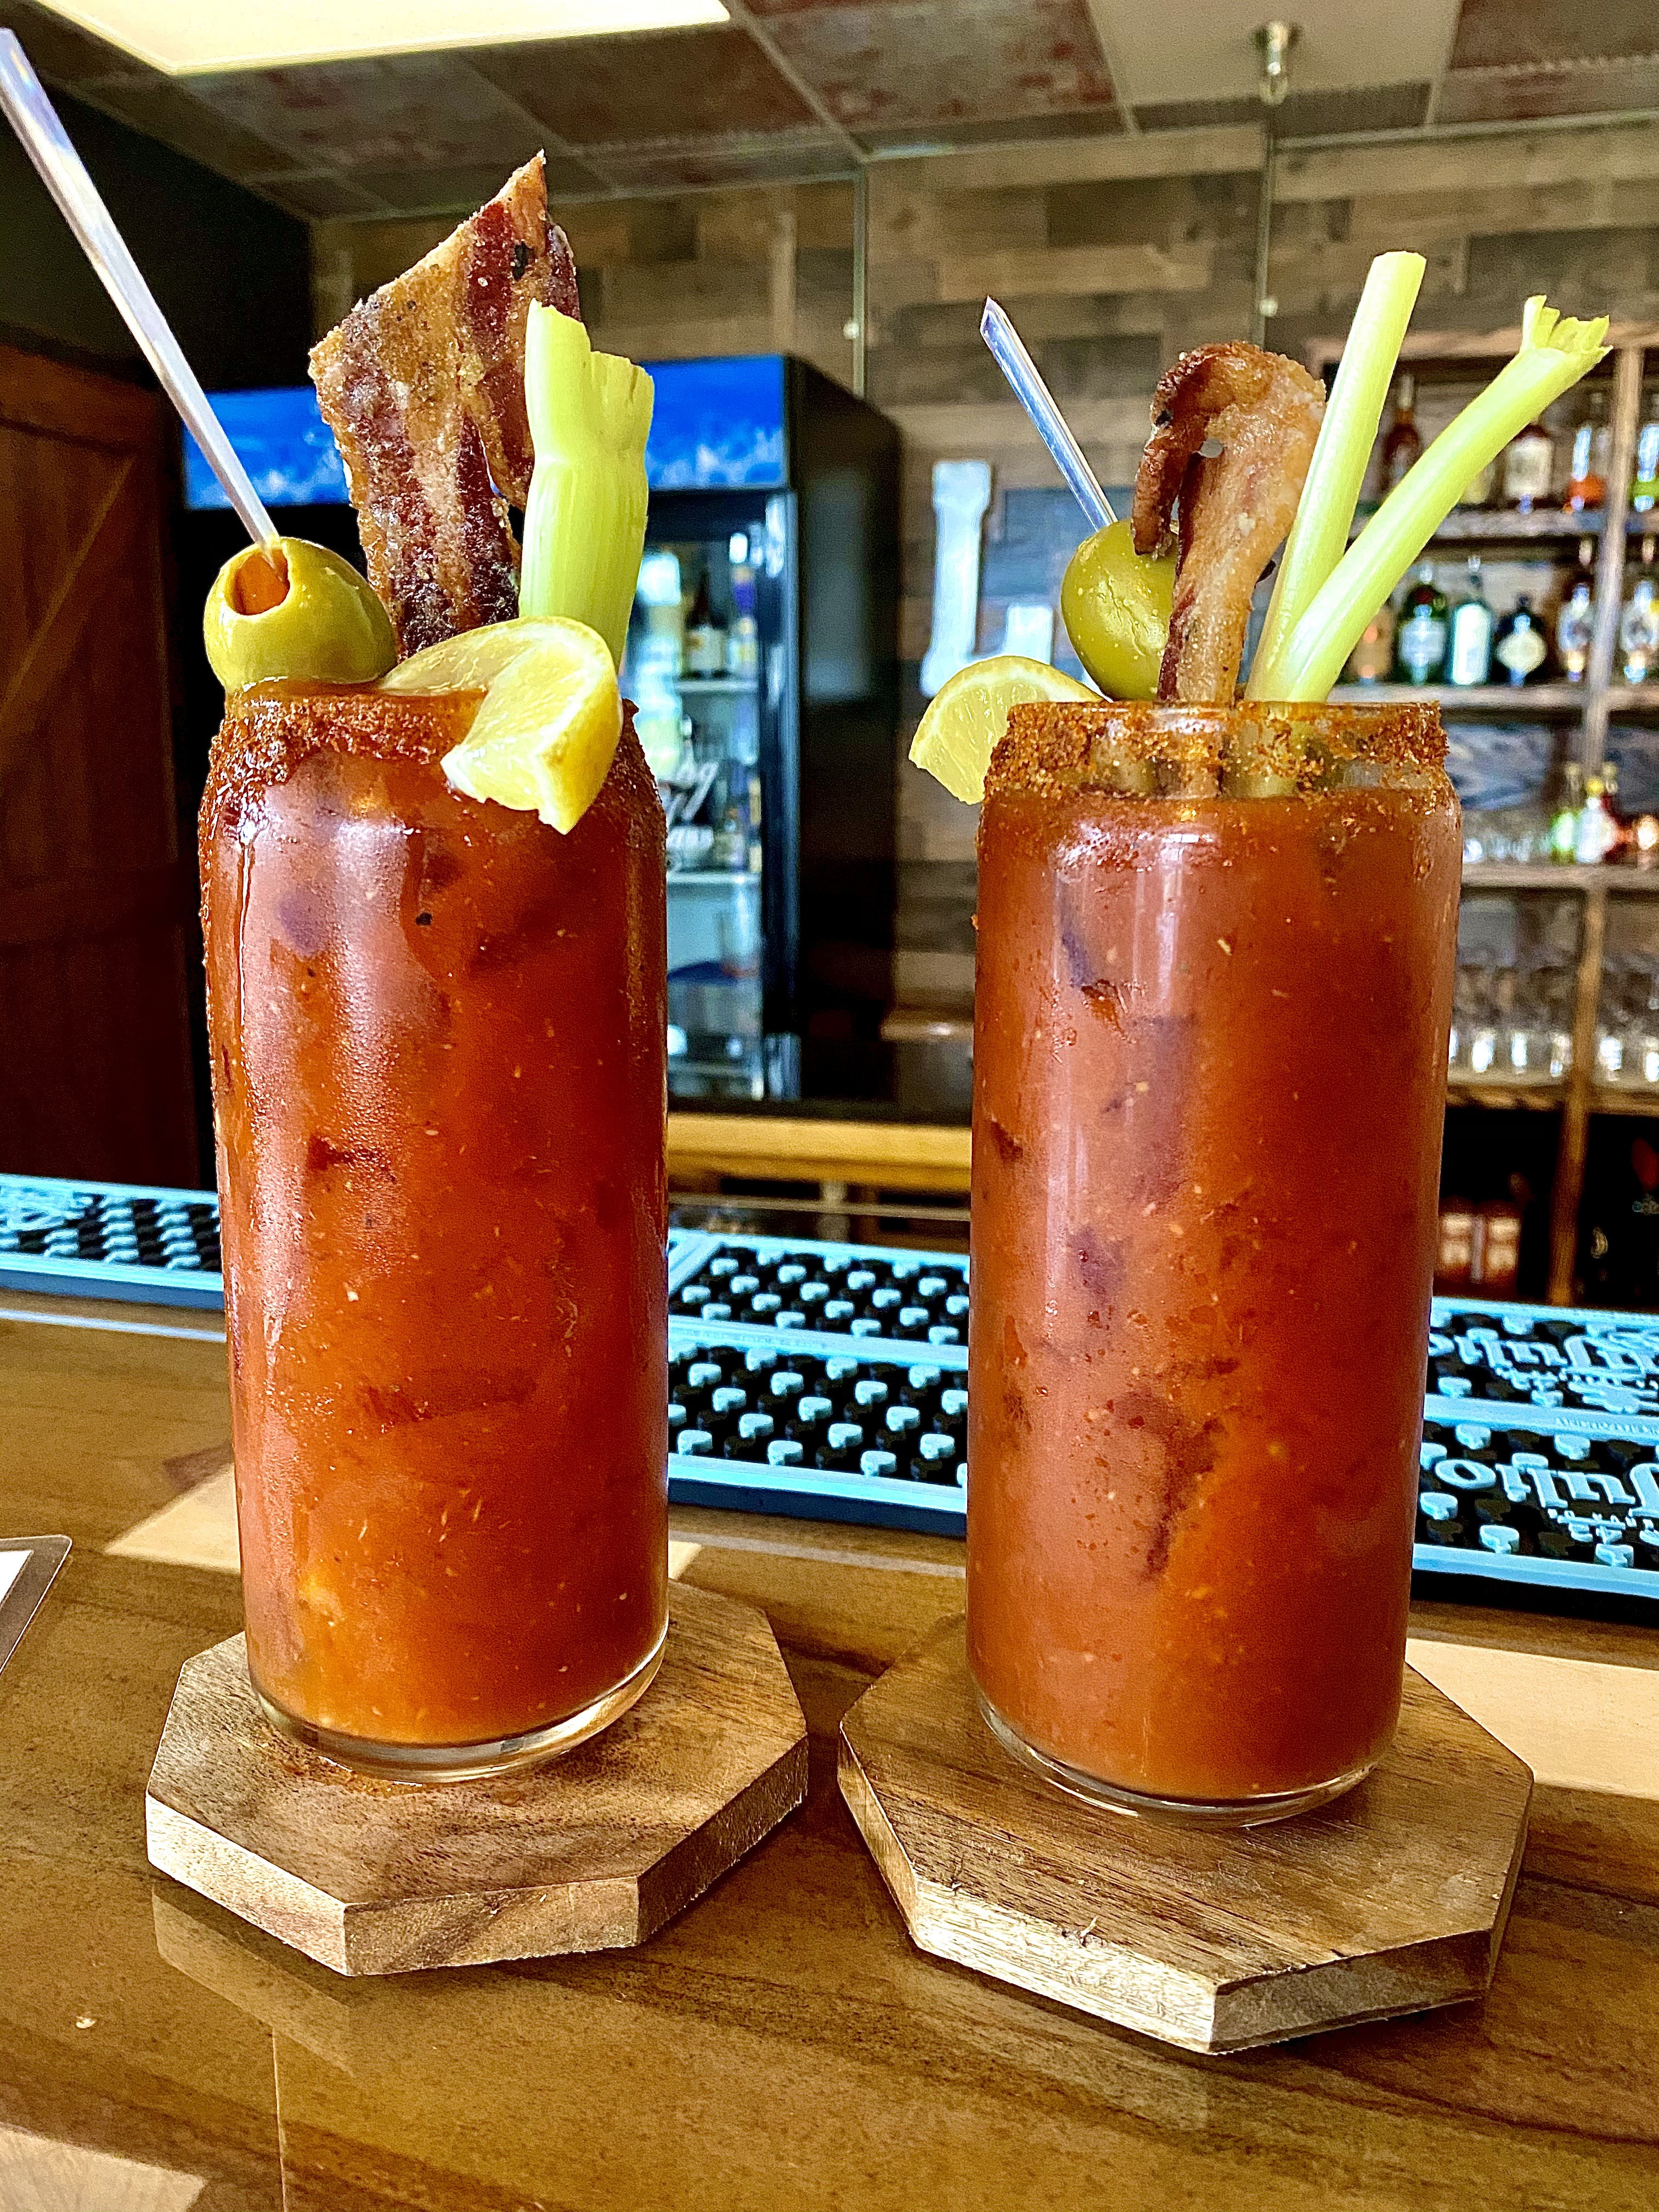 2 GEORGE’S® Bacon Infused OLD BAY® Bloody Marys served in OLD BAY® rimmed glasses with bacon and OLD BAY® seasoned celery stalk garnish